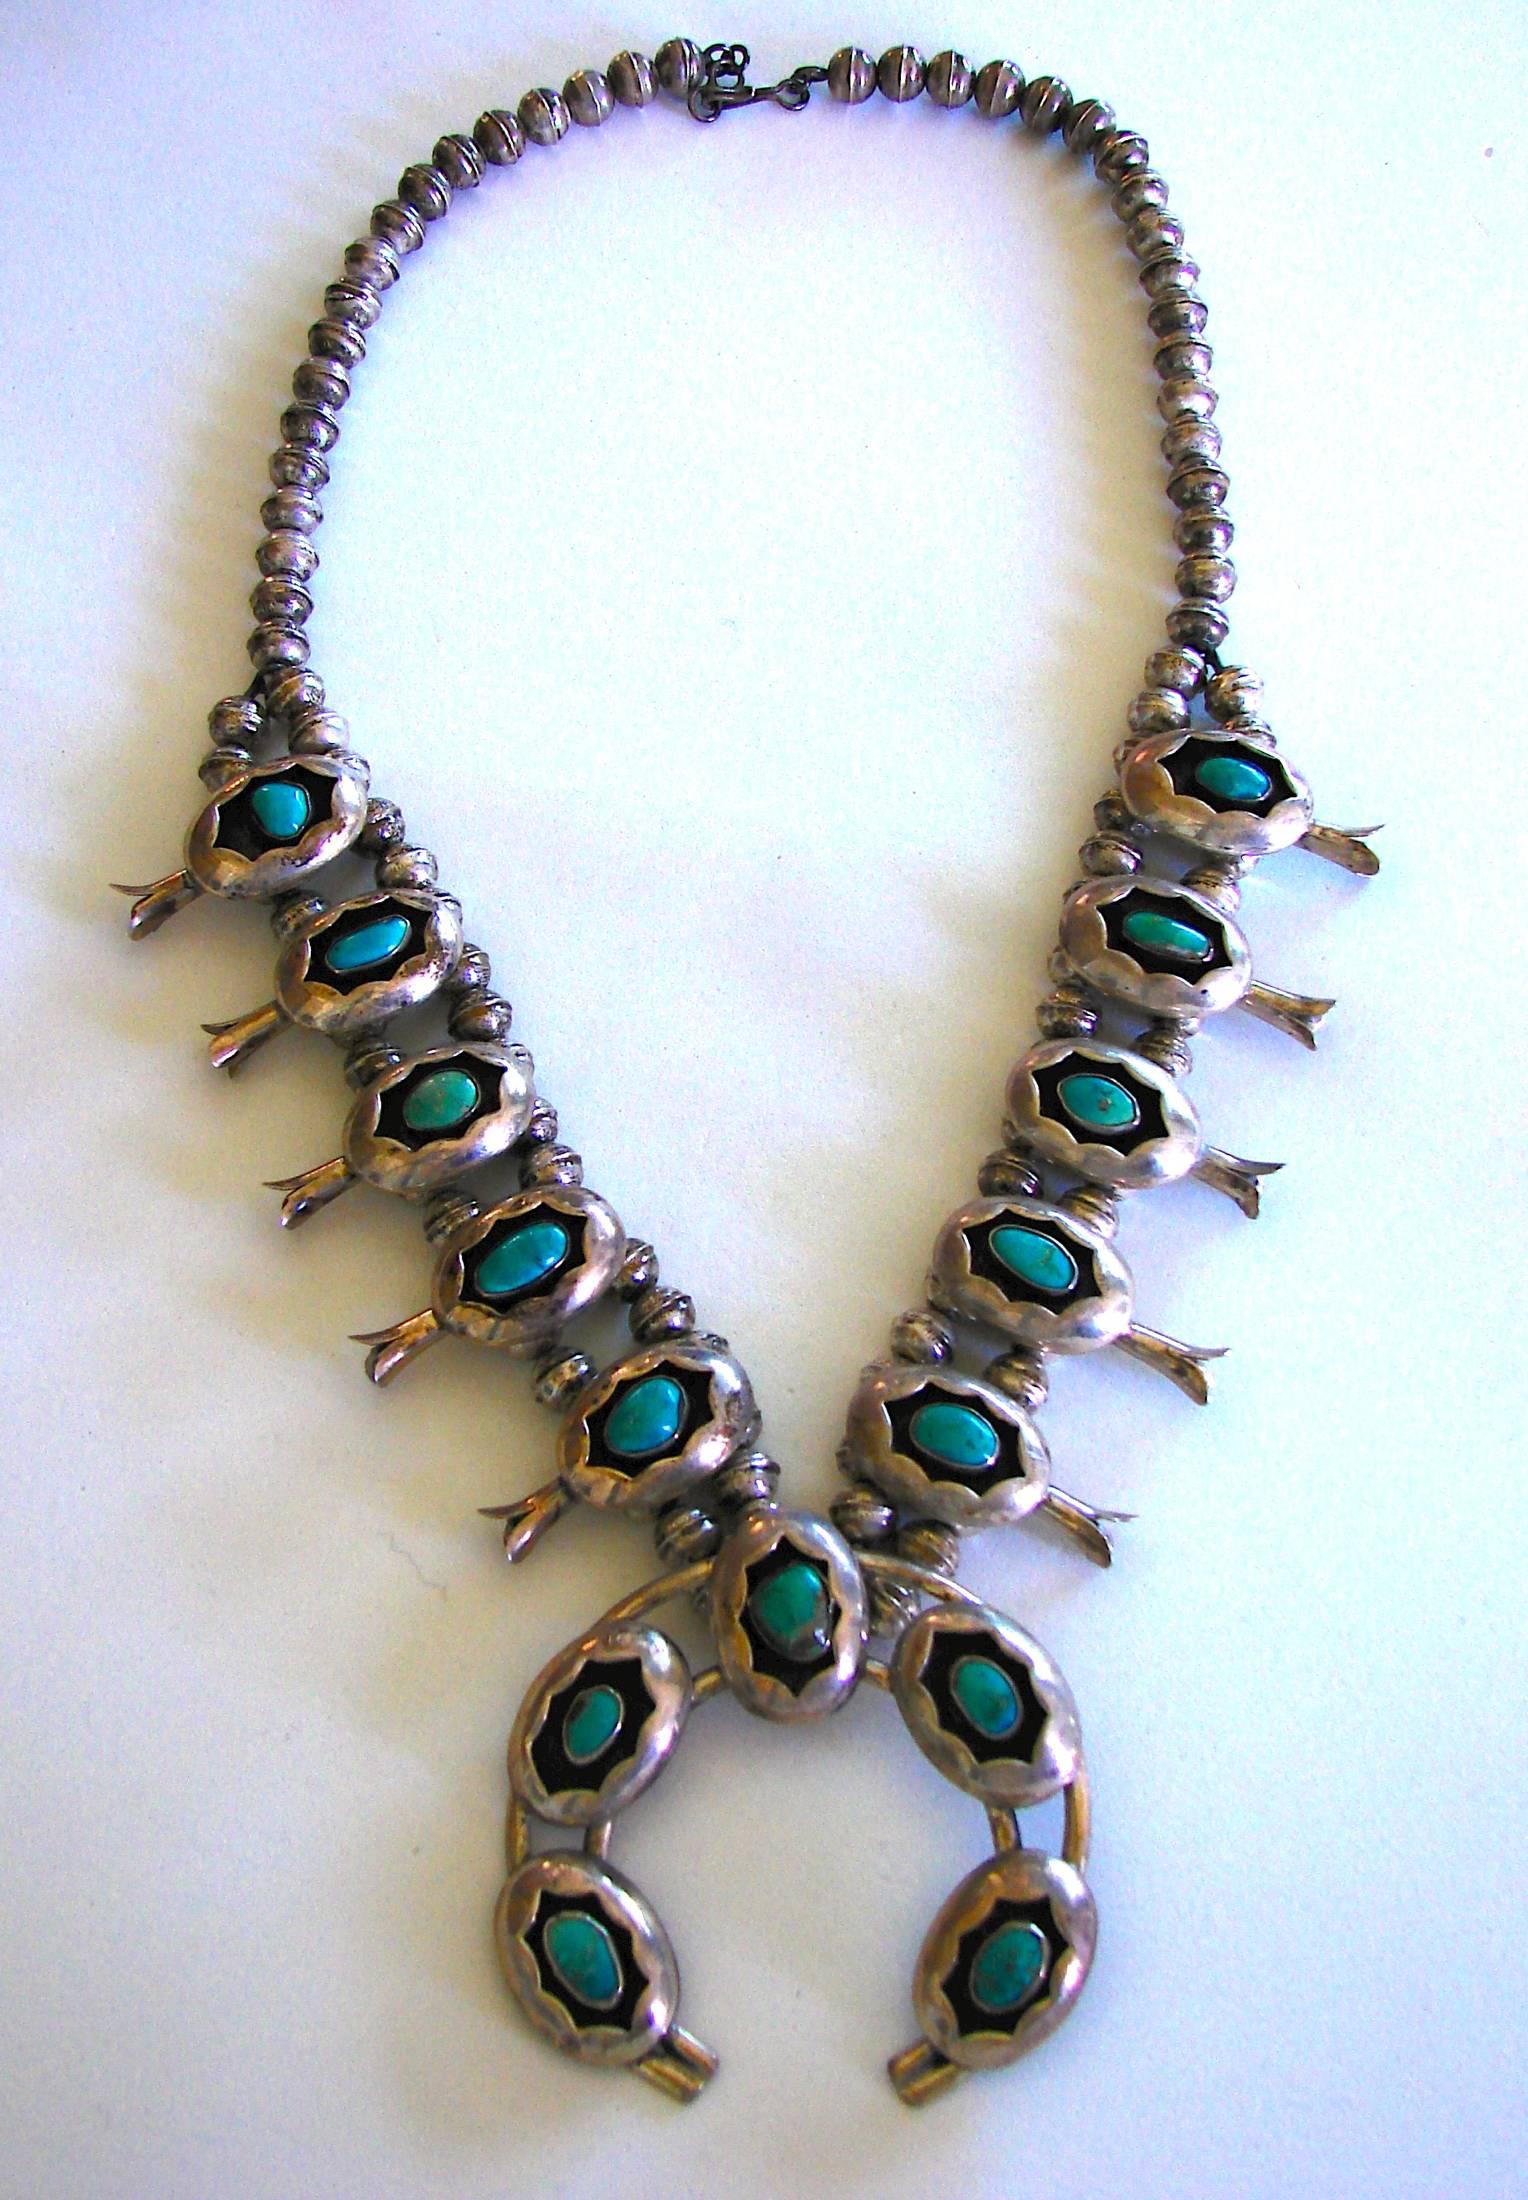 Massive vintage necklace from the 1970s features sterling silver and turquoise.  The necklace is about 23in long without the naja. The naja is about 2.5in diameter.   Unmarked.  Preowned/vintage with some tarnish to the silver, most notable on